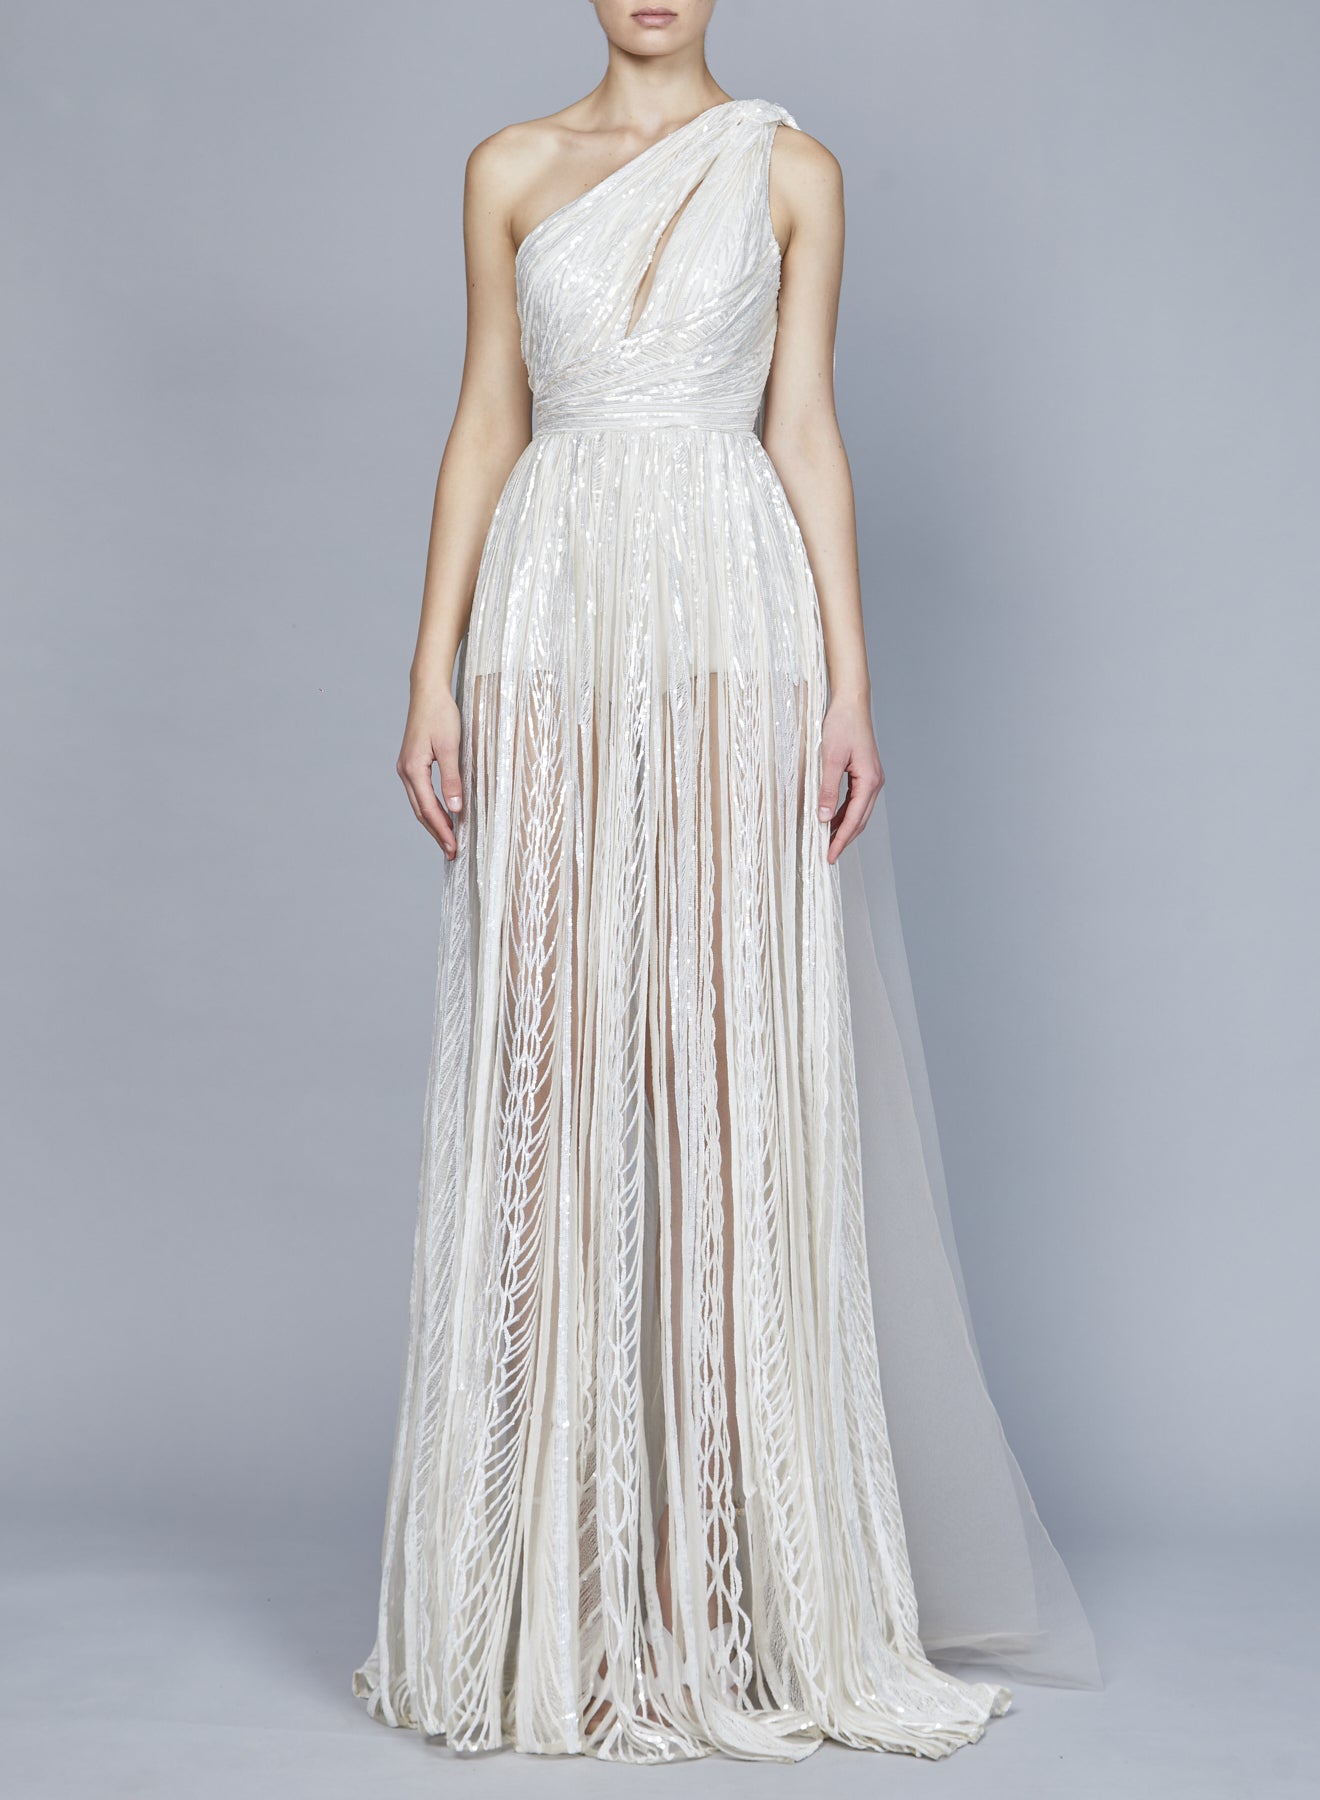 One-Shoulder White Embroidered Dress ...